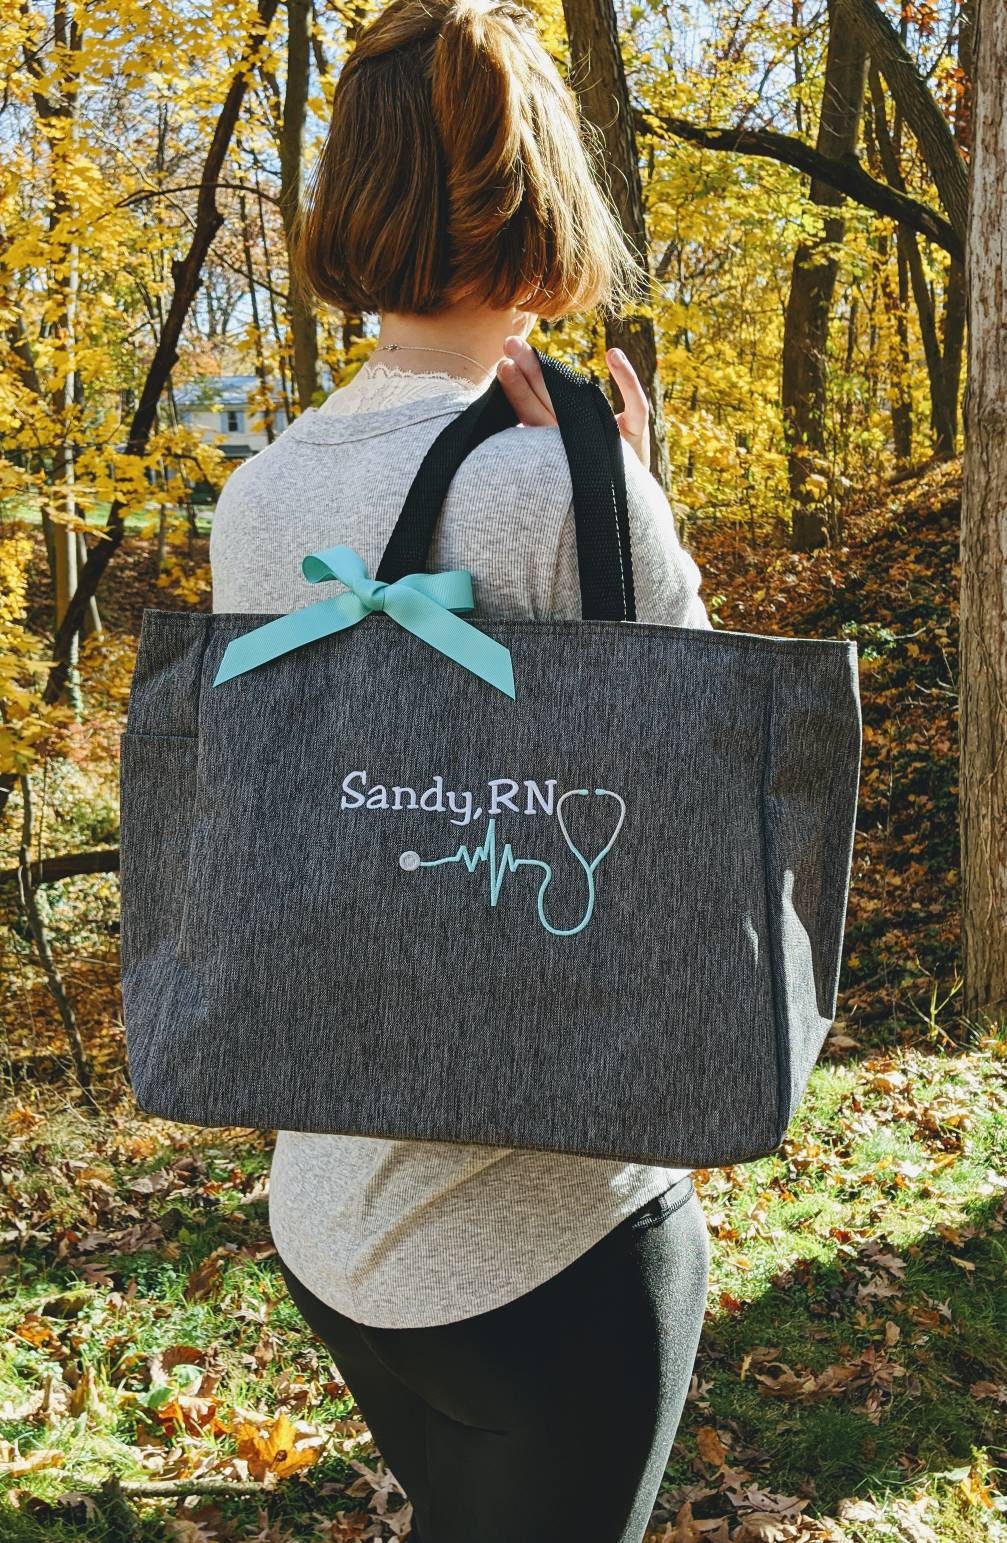 Nurse Personalized Tote Bag / Zippered Tote/ Nurse Gift / Work 